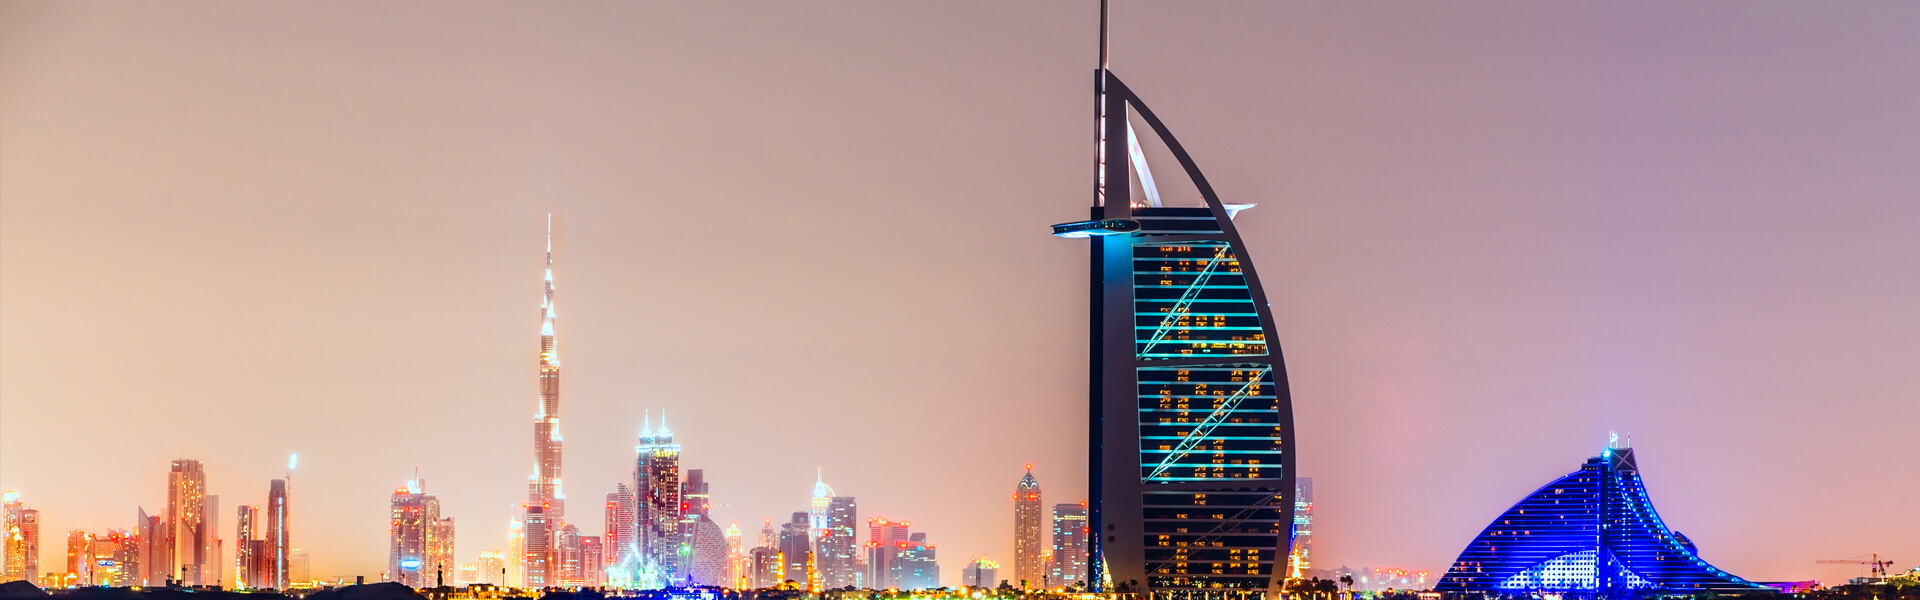 A Long Weekend in Dubai - How to Maximize Your Time Away